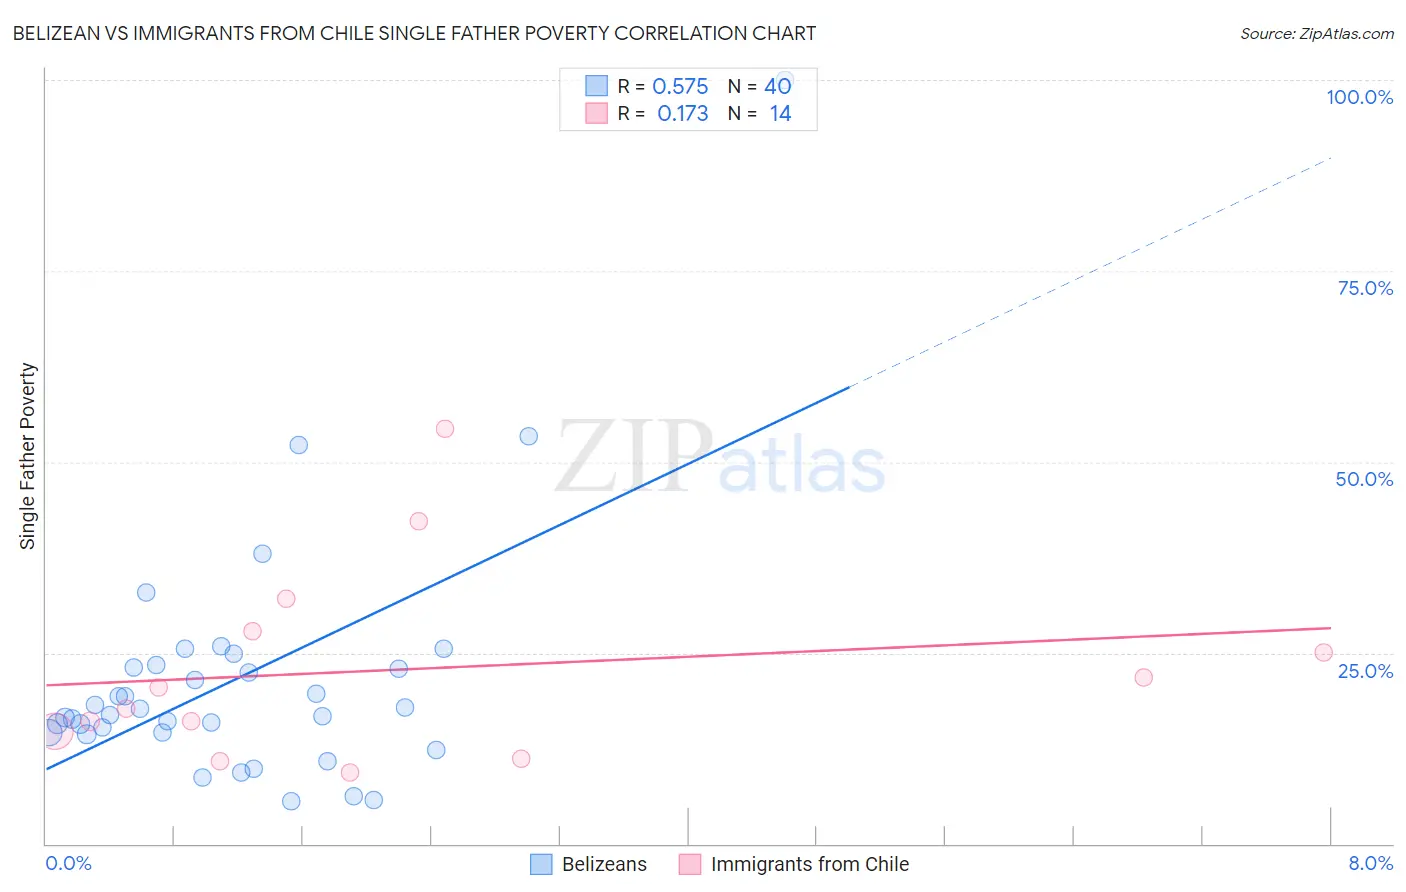 Belizean vs Immigrants from Chile Single Father Poverty